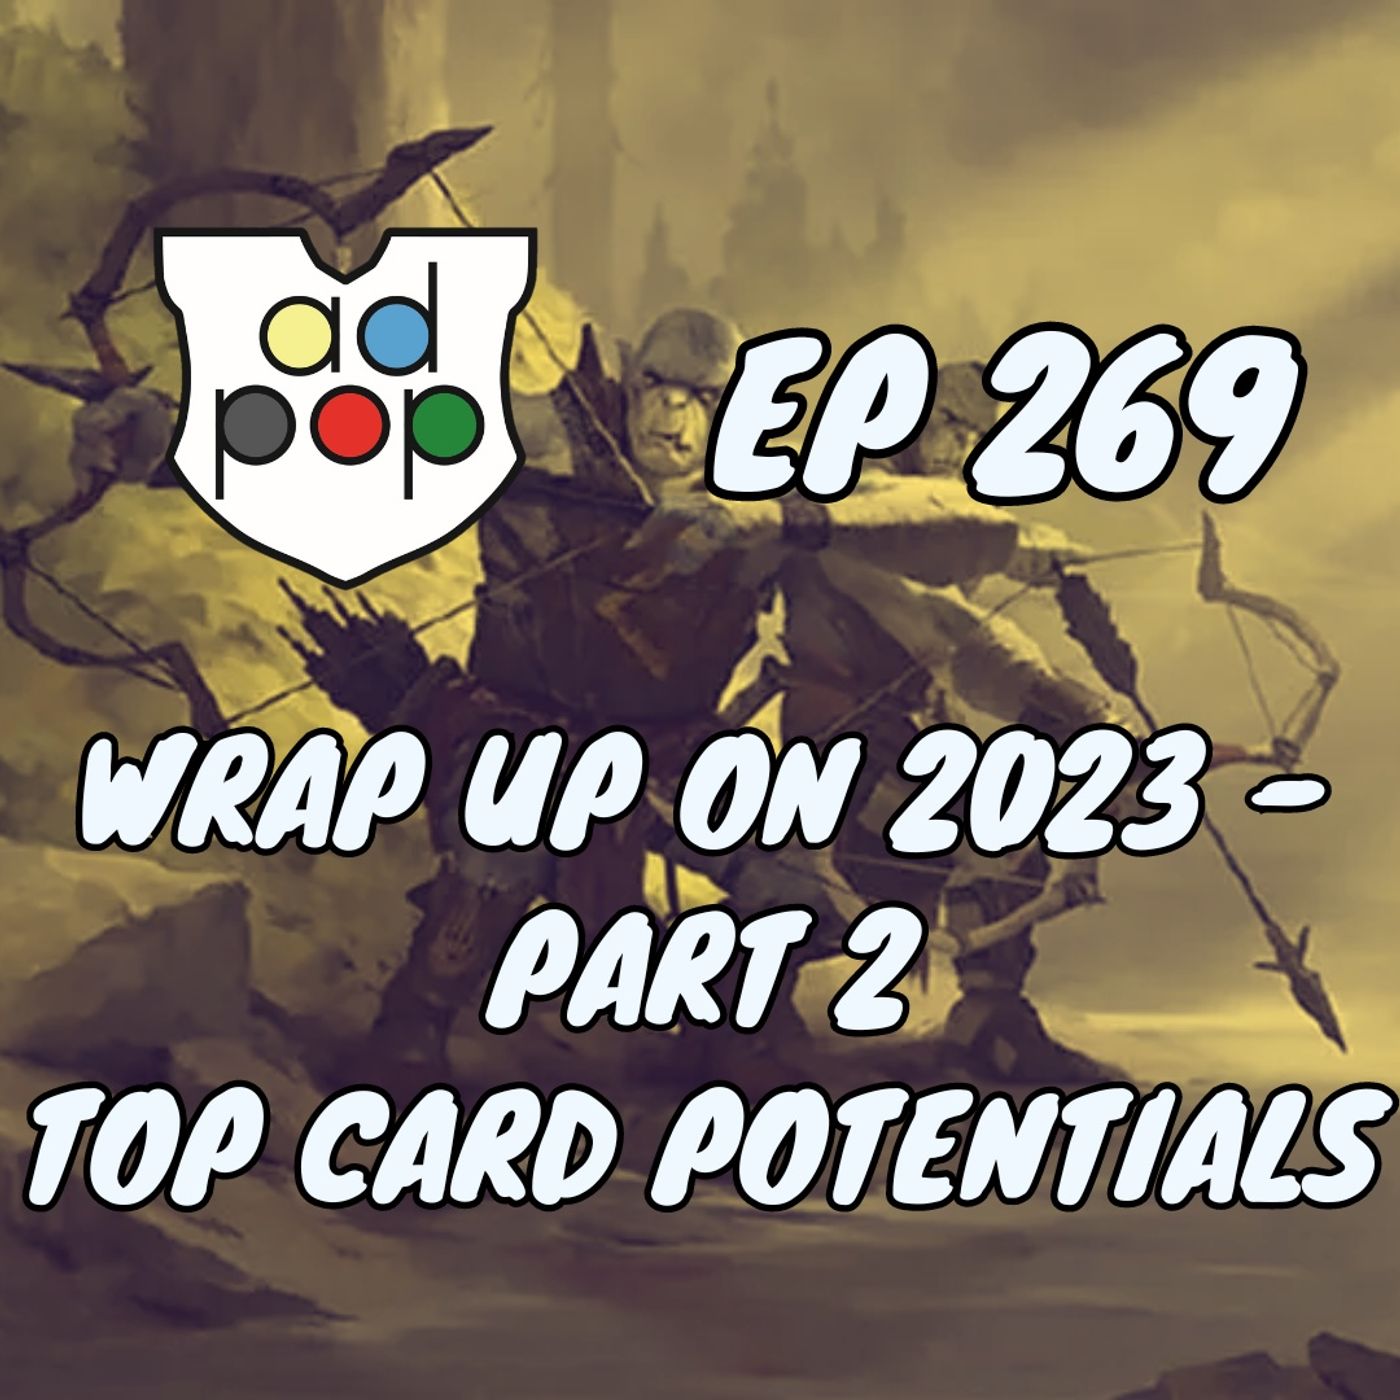 Commander ad Populum, Ep 269 - We Wrap Up On 2023 - Part 2